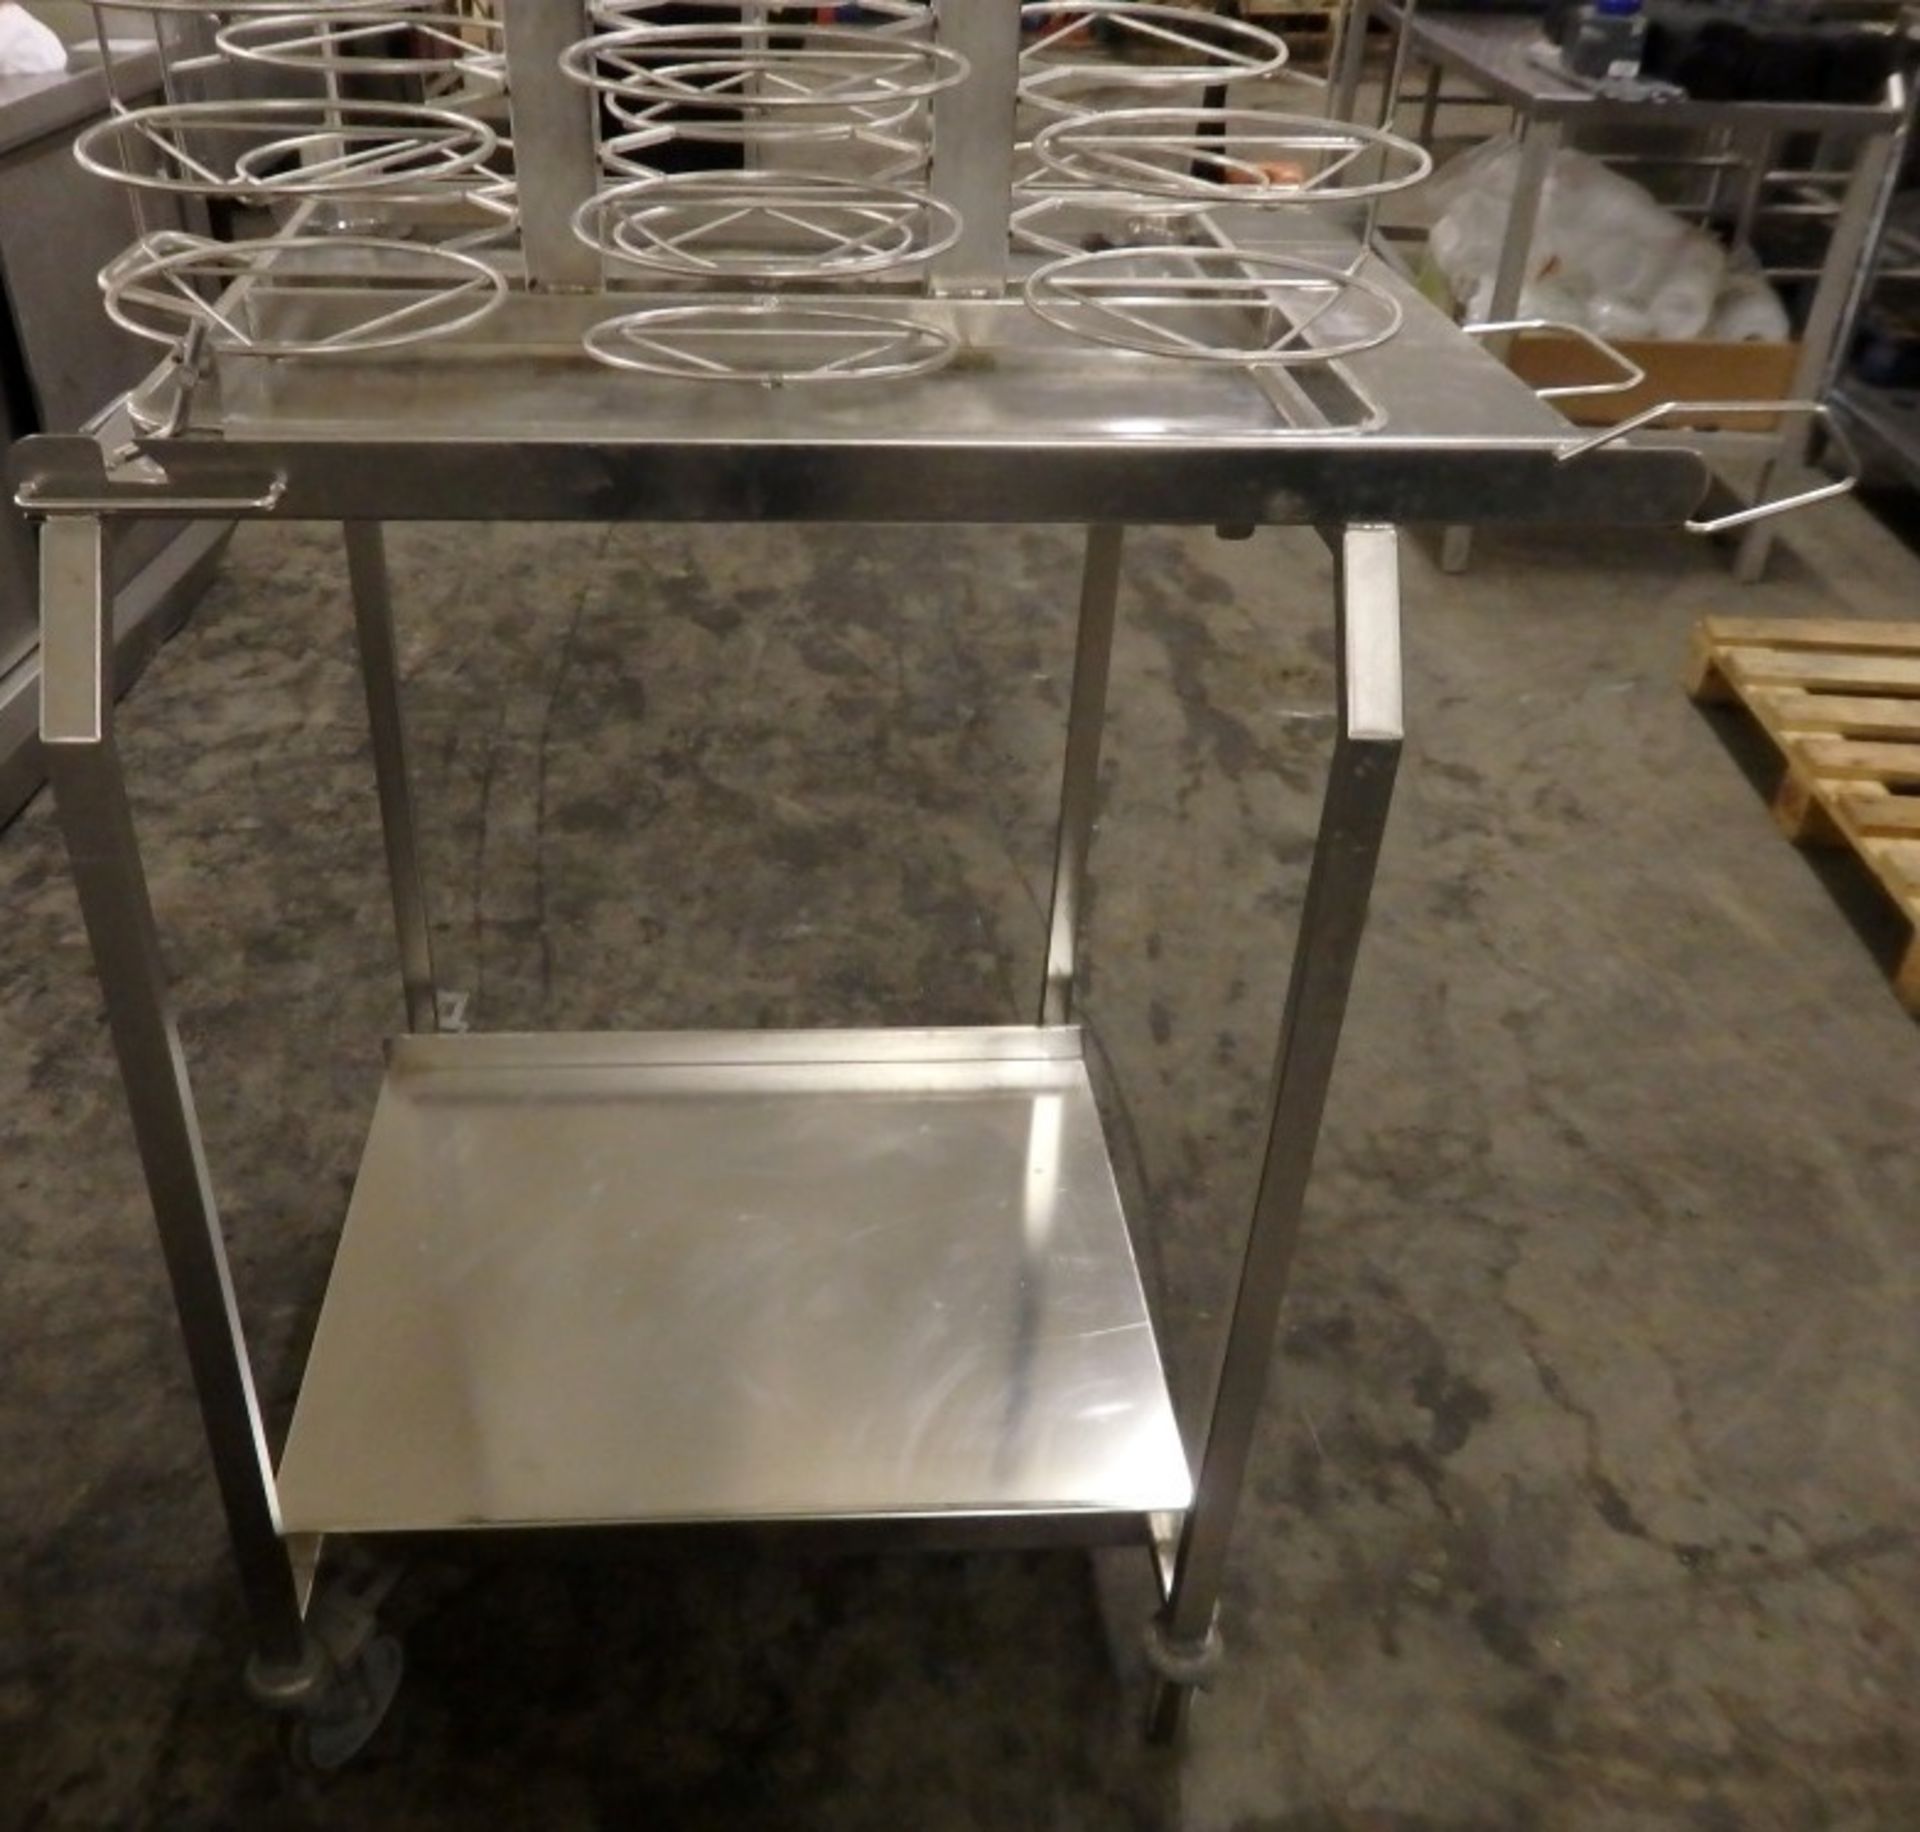 1 x Stainless Steel Plate Rack / Trolley With Thermal Cover -  Only Used Once Before  - 50 Plate - Image 4 of 4